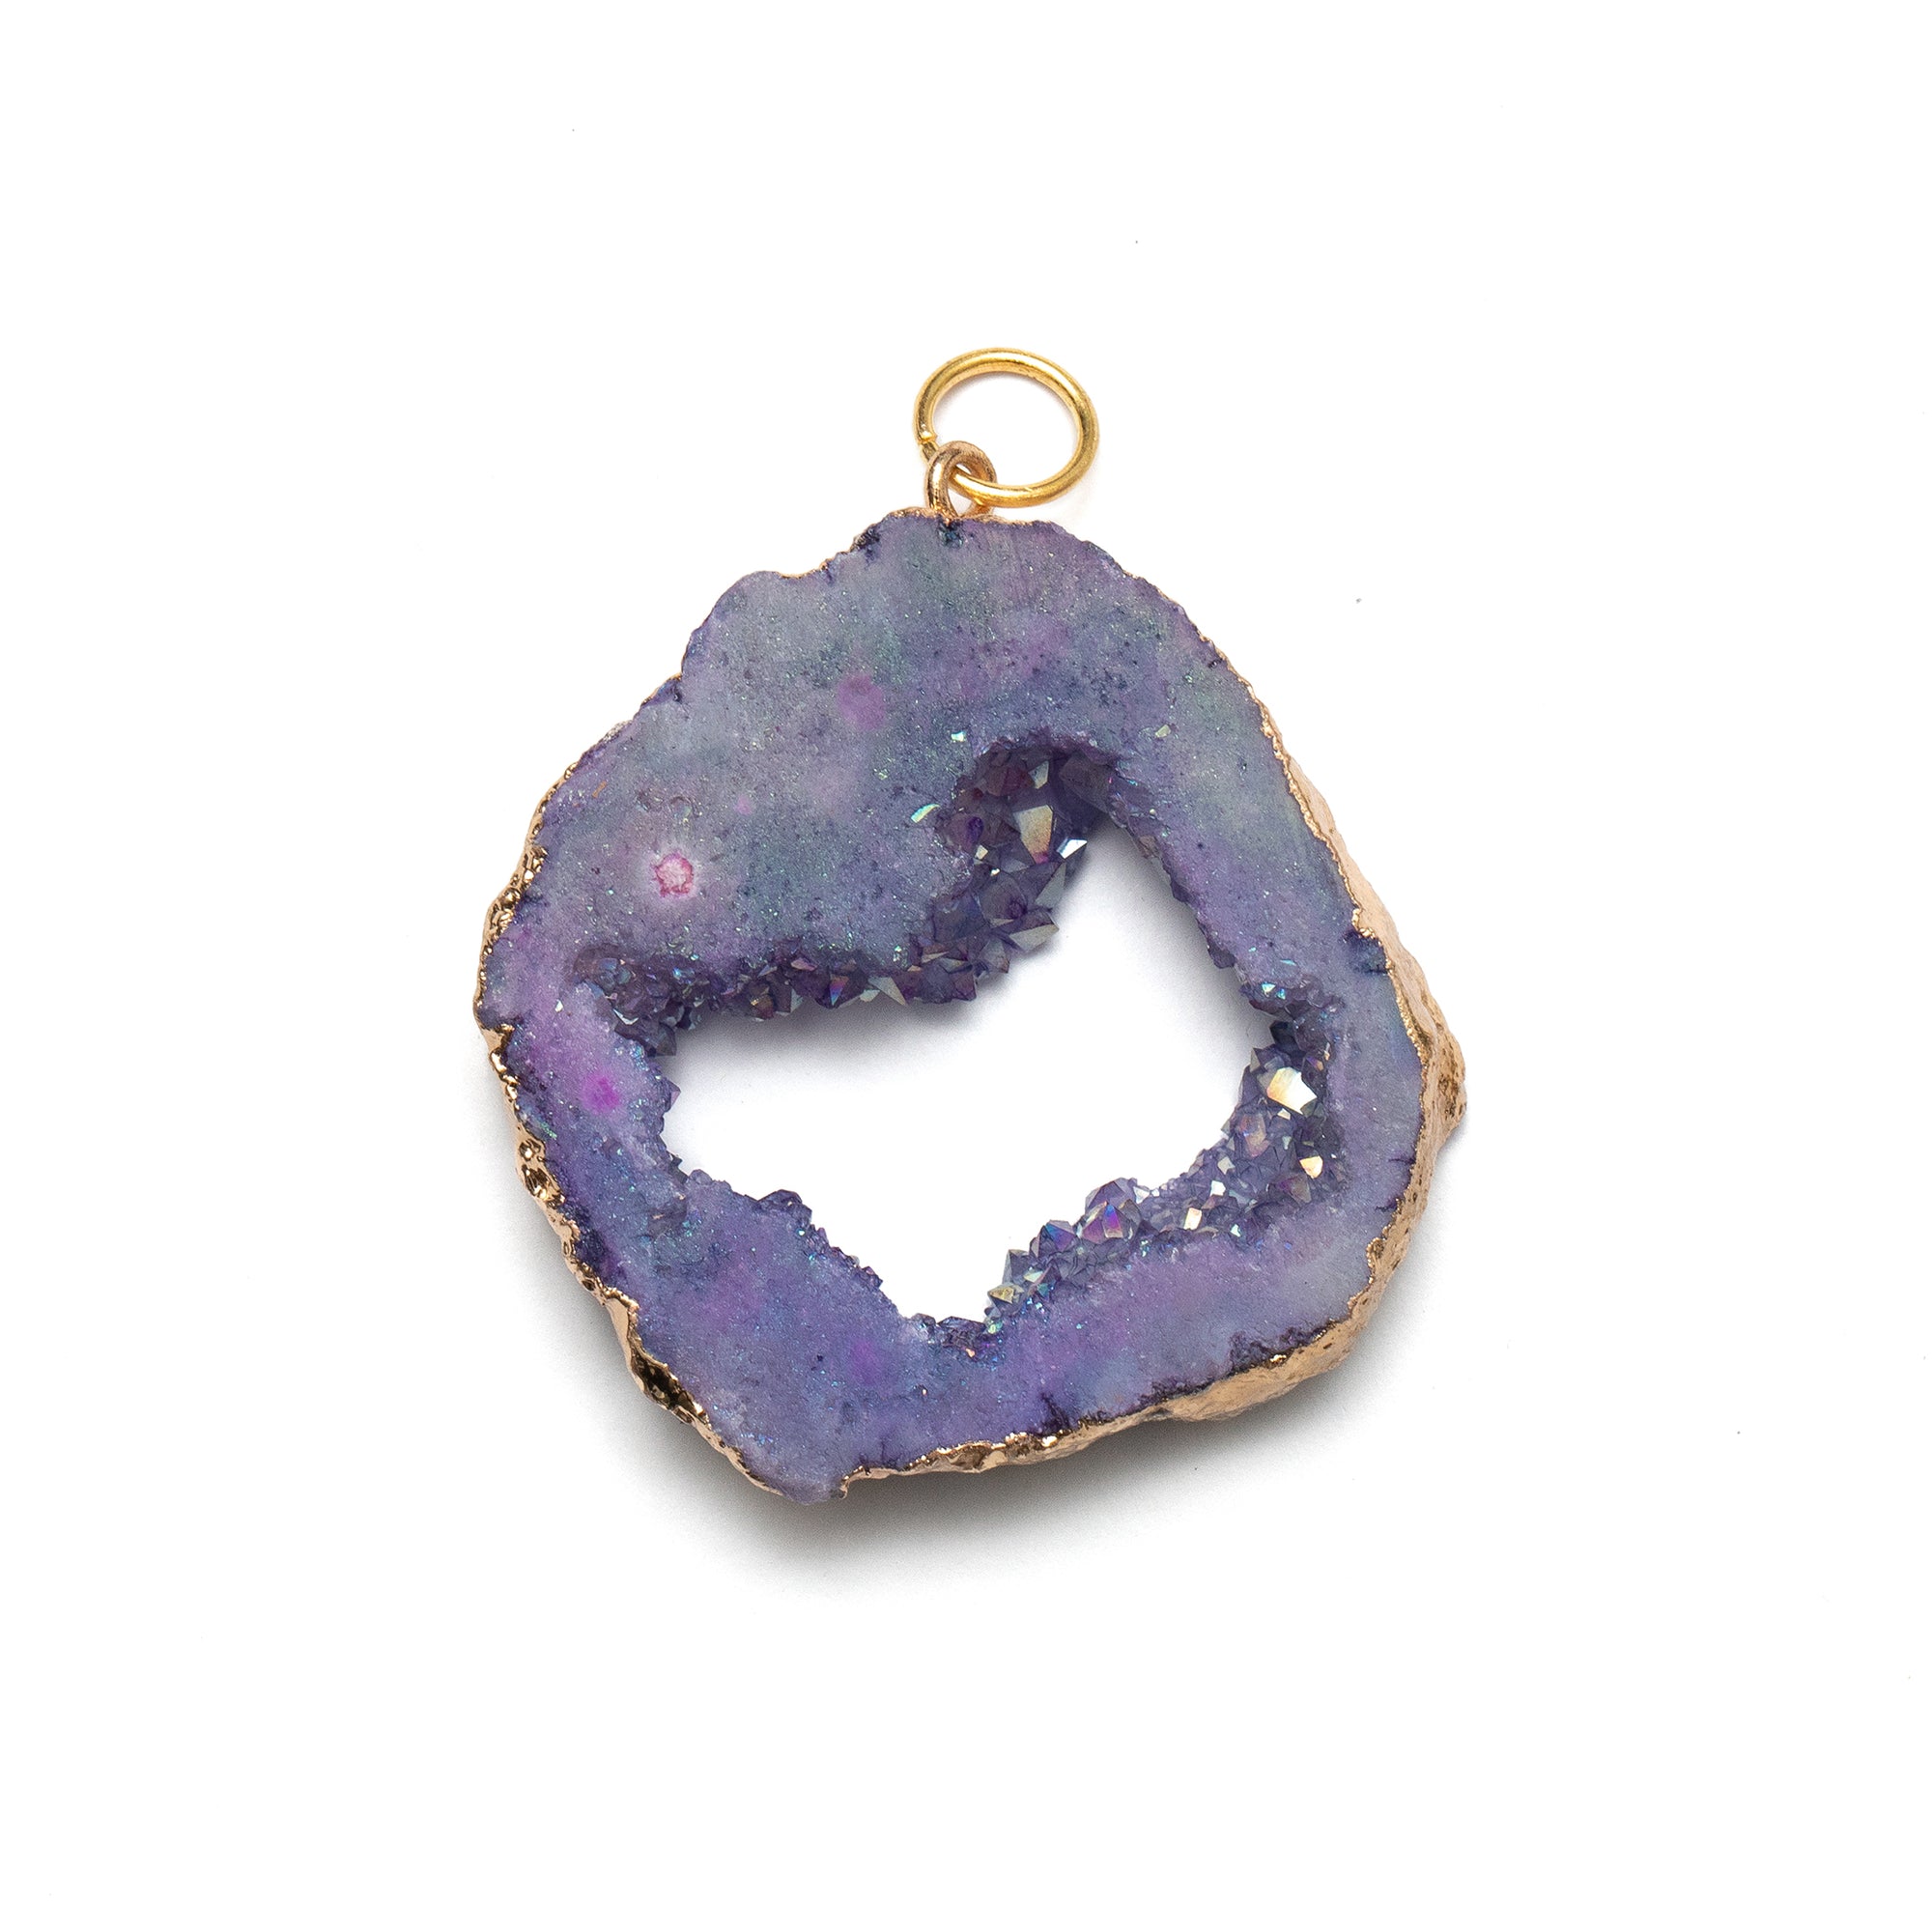 Ornament  Sliced Geode Purple with Gold